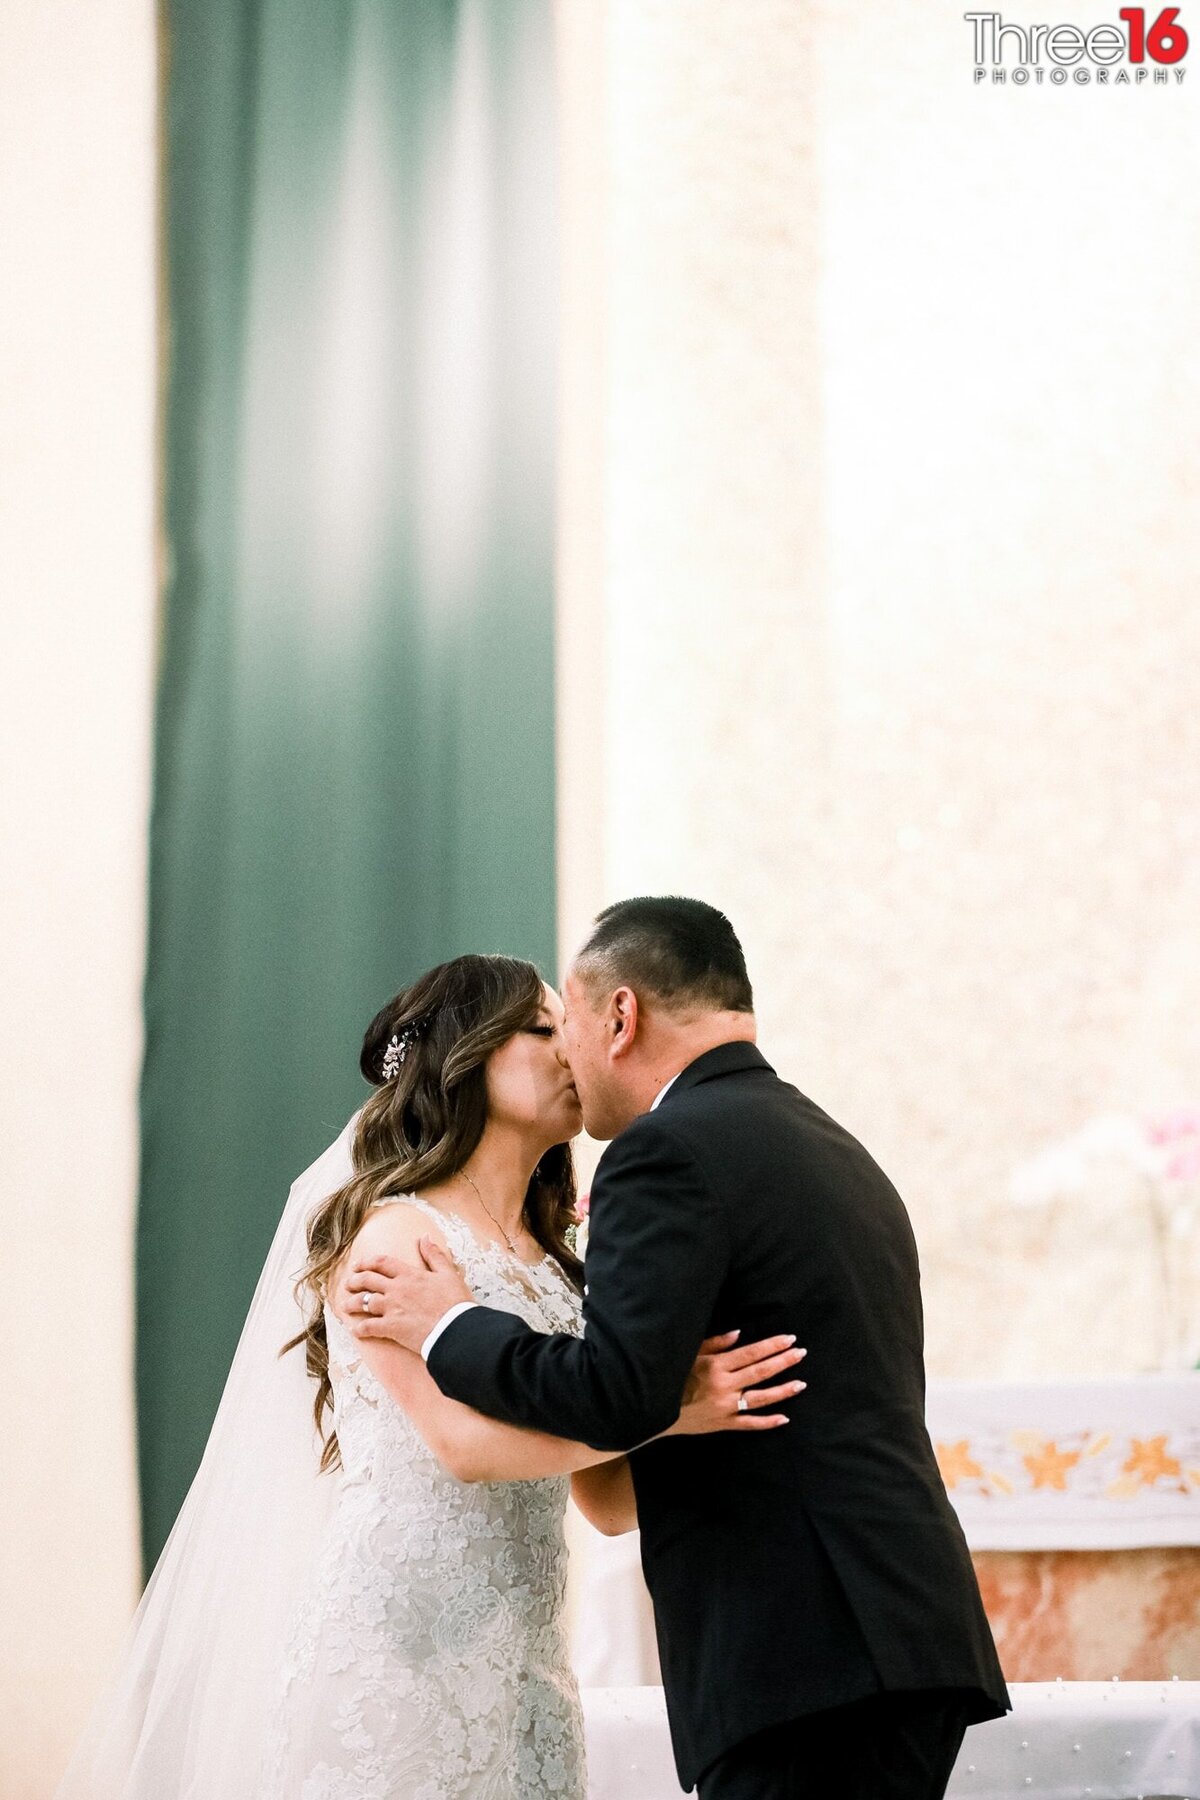 Bride and Groom share their first kiss at the altar as Husband and Wife